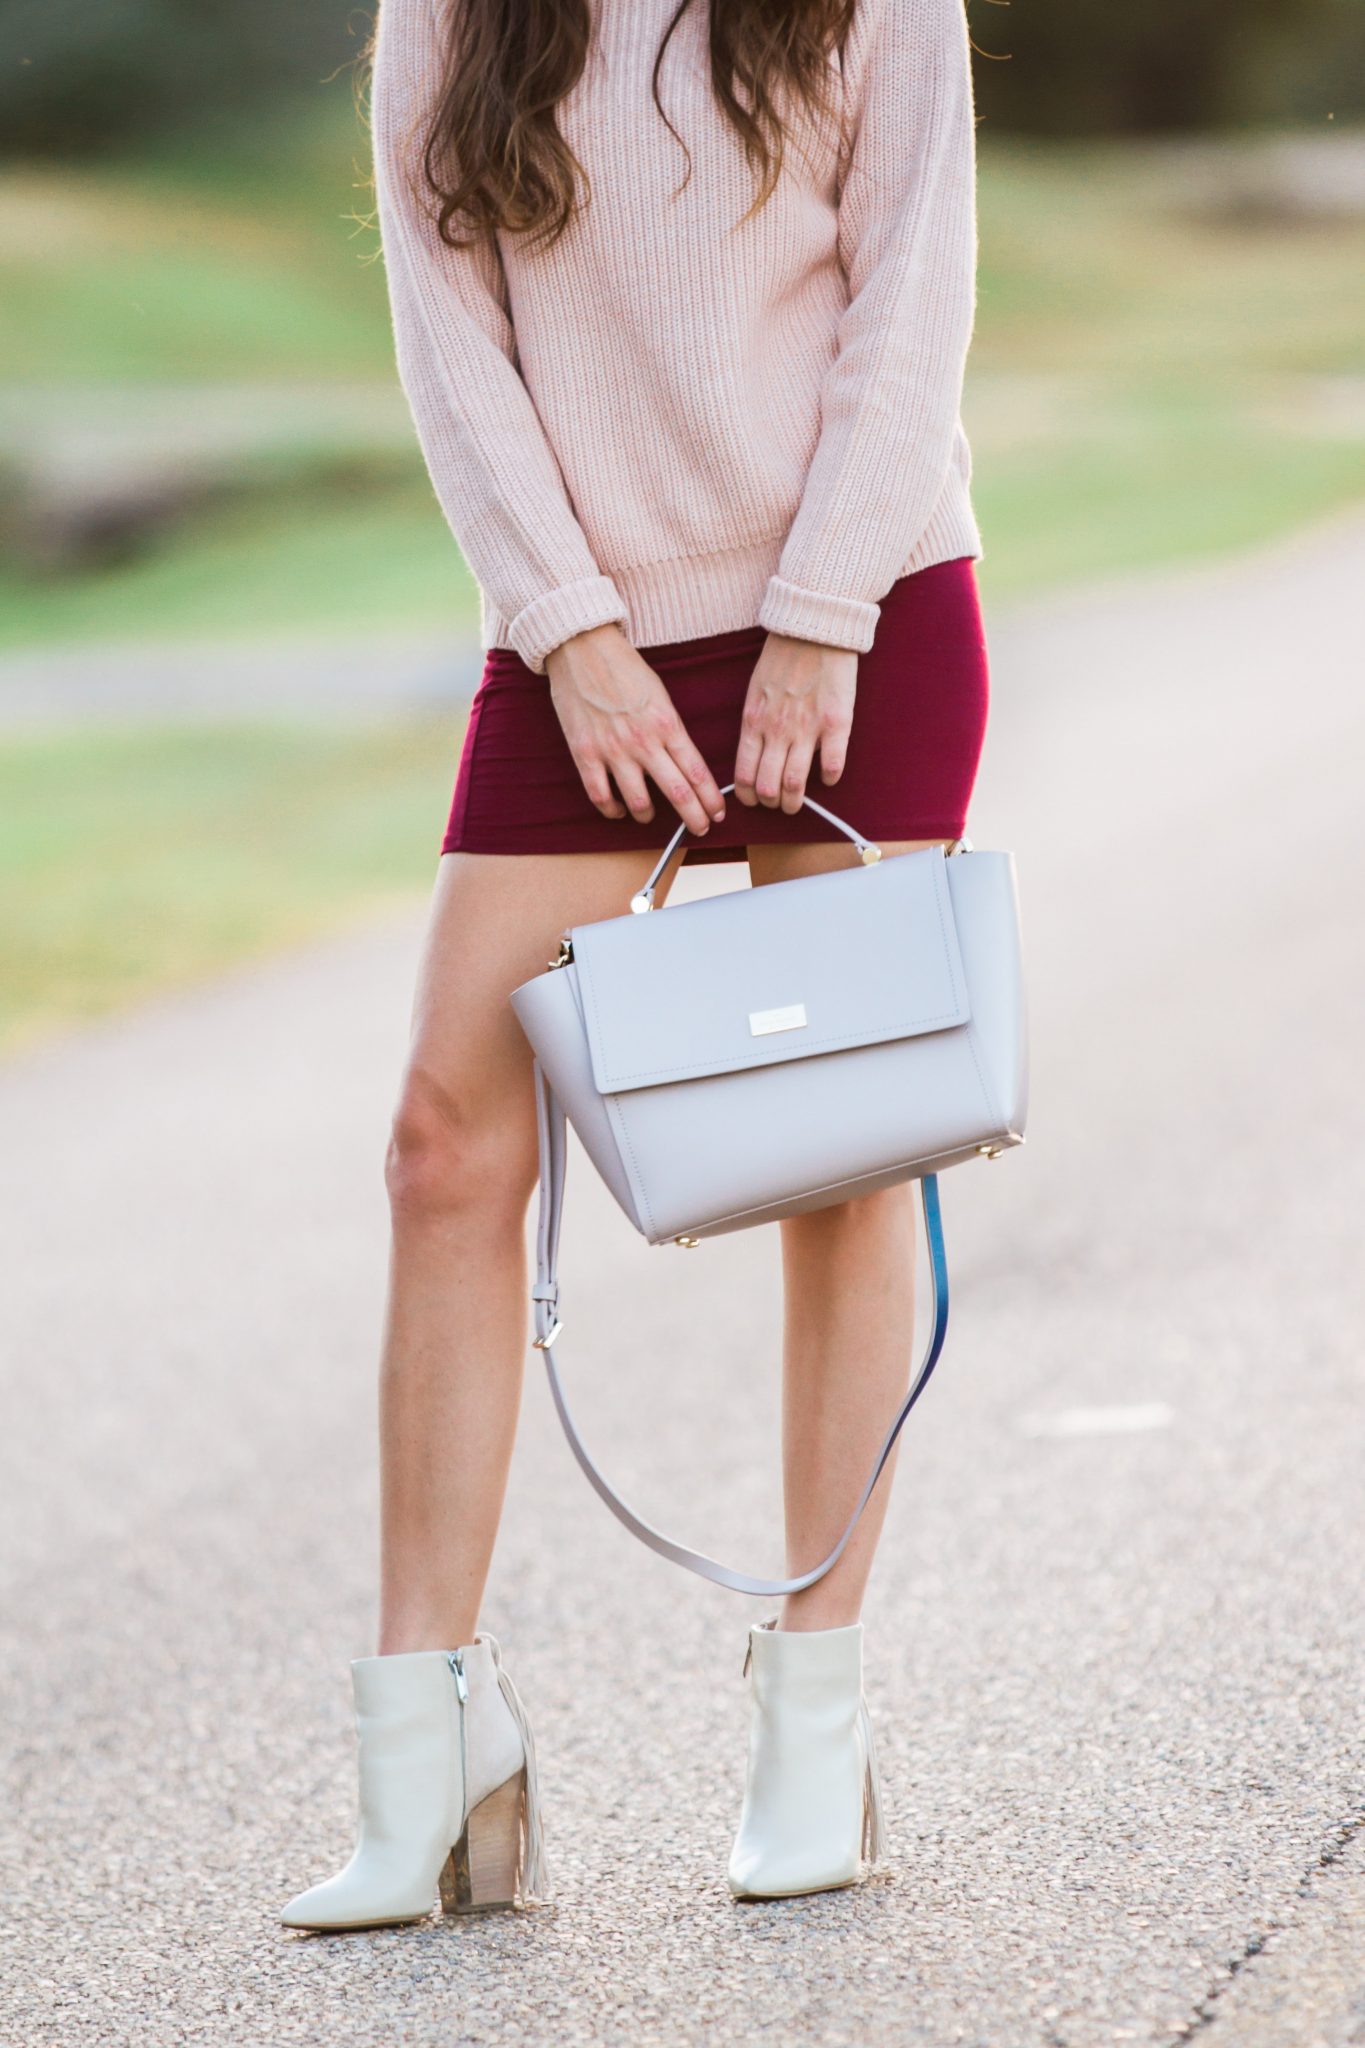 blush and wine color combination, best color combinations for fall, what colors to wear together for fall, pink and red, blush and burgundy, kate spade lilah, how to wear a floppy hat for fall, how to wear a wide brim hat for fall, fall style, fall trends, fall trendy style, fall outfit ideas